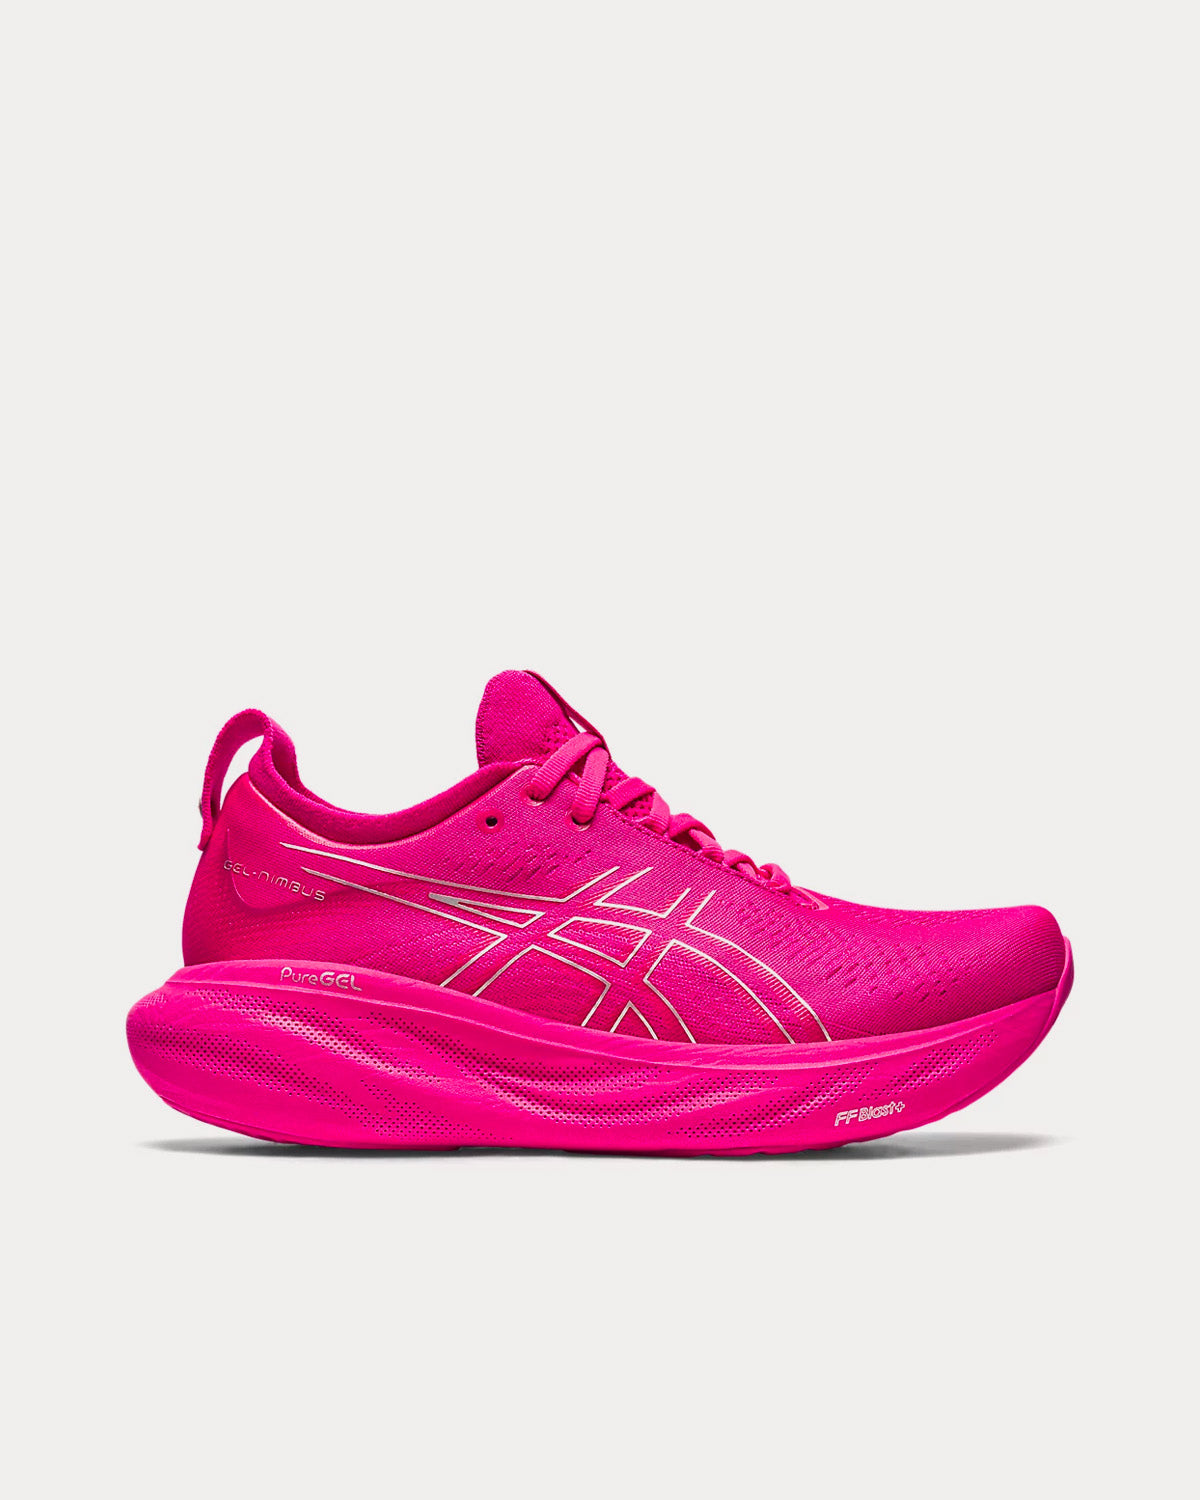 Asics Gel-Nimbus 25 Pink Rave / Pure Silver Running Shoes - Sneak in Peace